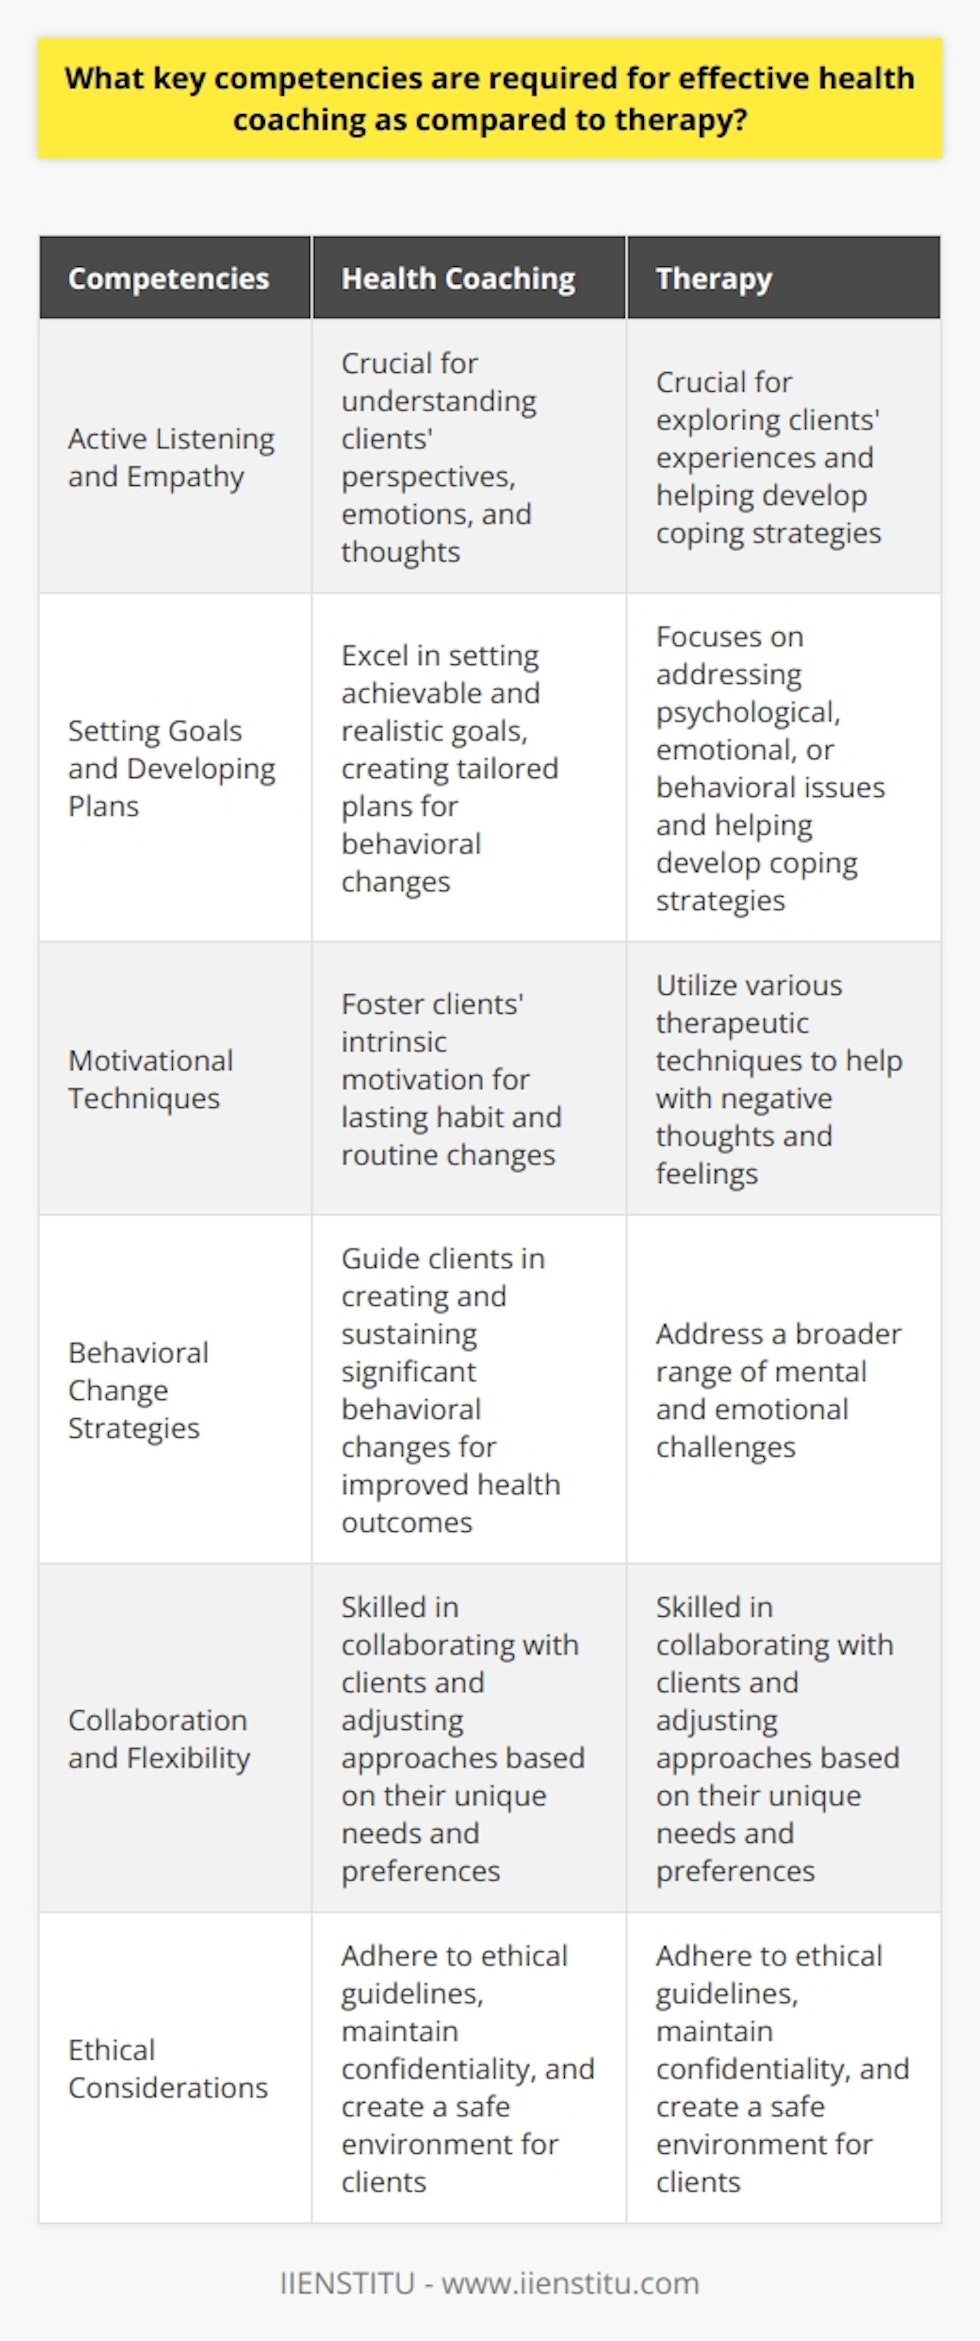 IntroductionTo be an effective health coach or therapist, certain key competencies are essential. While there are similarities between the two roles, they have distinct objectives and methods. This article will explore the competencies required for effective health coaching compared to therapy.Active Listening and EmpathyActive listening and empathy are crucial competencies for both health coaches and therapists. It is important for professionals in these roles to understand their clients' perspectives, emotions, and thoughts in order to guide them effectively.Setting Goals and Developing PlansHealth coaches need to excel in setting achievable and realistic goals for their clients. This involves creating tailored plans that incorporate lifestyle and behavioral changes to improve overall health and wellbeing. Therapy, on the other hand, focuses on addressing psychological, emotional, or behavioral issues by exploring clients' experiences and helping them develop coping strategies.Motivational TechniquesWhile both health coaches and therapists use motivational techniques, they differ in their implementation. Health coaches must foster clients' intrinsic motivation, encouraging them to make lasting changes to their habits and routines. Therapists, on the other hand, may utilize various therapeutic techniques, such as cognitive-behavioral therapies, to help clients deal with negative thoughts and feelings.Behavioral Change StrategiesA primary focus of health coaching is guiding clients to create and sustain significant behavioral changes that lead to improved health outcomes. Consequently, health coaches must possess a deep understanding of evidence-based strategies, such as stages of change and social cognitive theory. Therapy may incorporate behavioral change, but it is not always the primary objective. Instead, therapists work with clients to address a broader range of mental and emotional challenges.Collaboration and FlexibilityBoth health coaches and therapists should be skilled at collaborating with clients to find individualized solutions. Additionally, they must be flexible in adjusting their approaches to suit clients' unique needs and preferences. This ability is crucial when navigating barriers or setbacks within the coaching or therapy process.Ethical ConsiderationsLastly, adherence to ethical guidelines, maintaining confidentiality, and creating a safe environment for clients are vital for both health coaches and therapists. This ensures clients' trust, which is essential for facilitating change.ConclusionIn conclusion, effective health coaching and therapy require a range of competencies, including active listening, empathy, goal-setting, and collaborative skills. Although there are overlaps between the two roles, they differ in their focus on goal-setting, motivational techniques, and behavioral change strategies. Understanding these competencies is essential for providing appropriate guidance and support to clients on their journey towards better health and wellbeing.